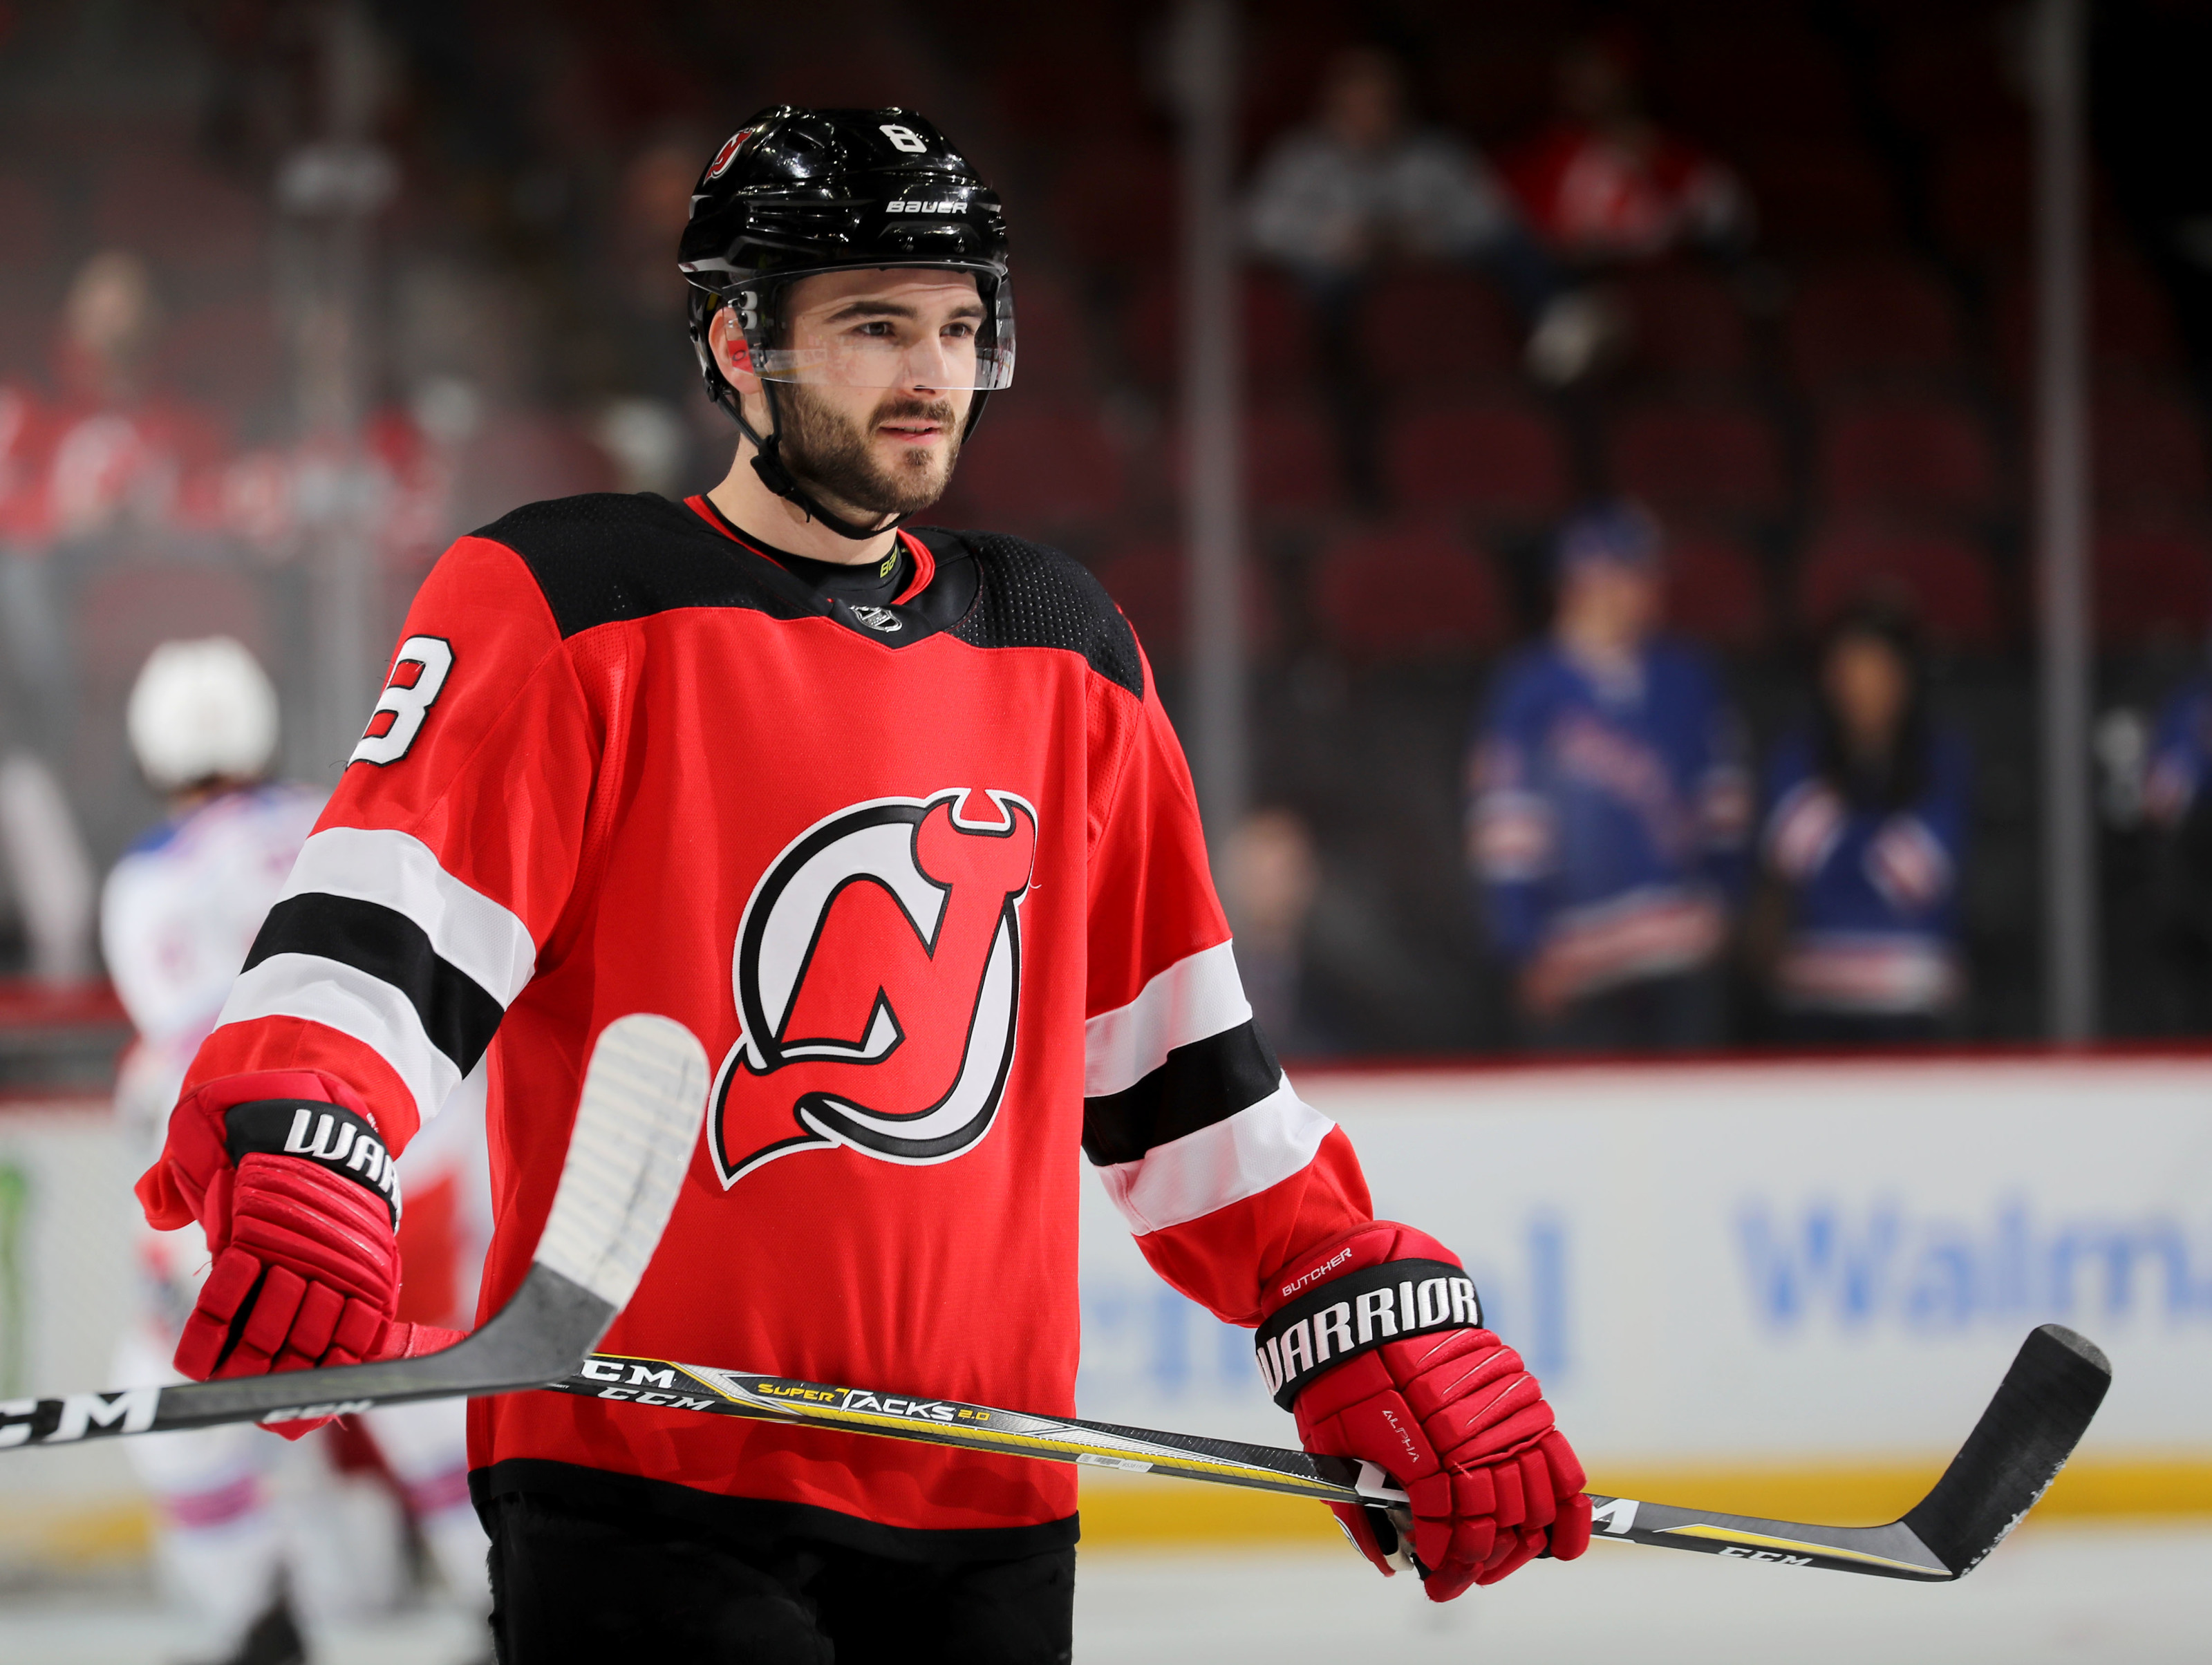 Will Butcher Stakes Claim for New Role on the New Jersey Devils Roster